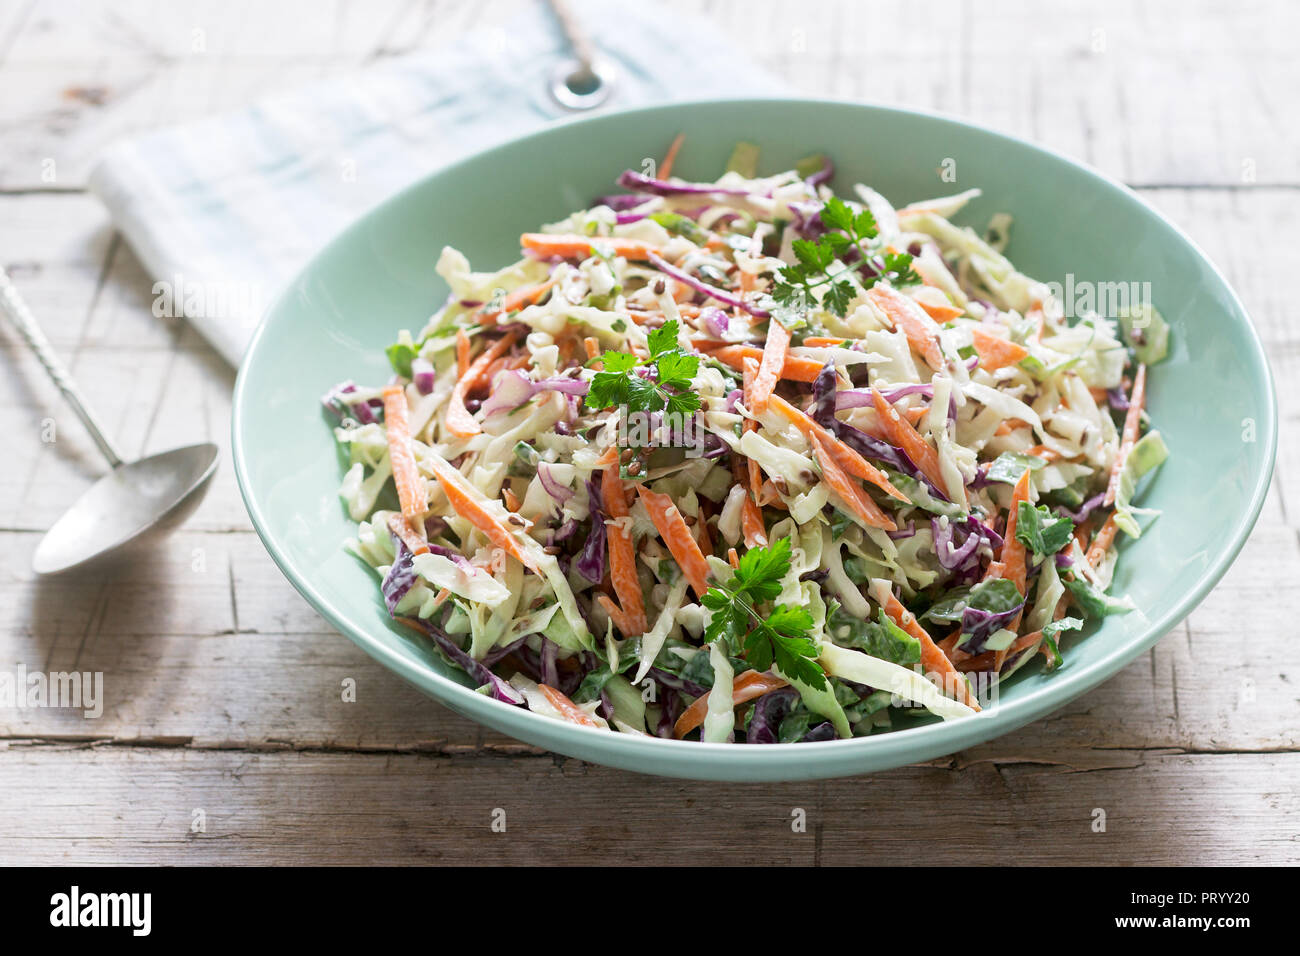 Coleslaw of cabbage, carrots and various herbs with mayonnaise in a large plate on a wooden background. Stock Photo